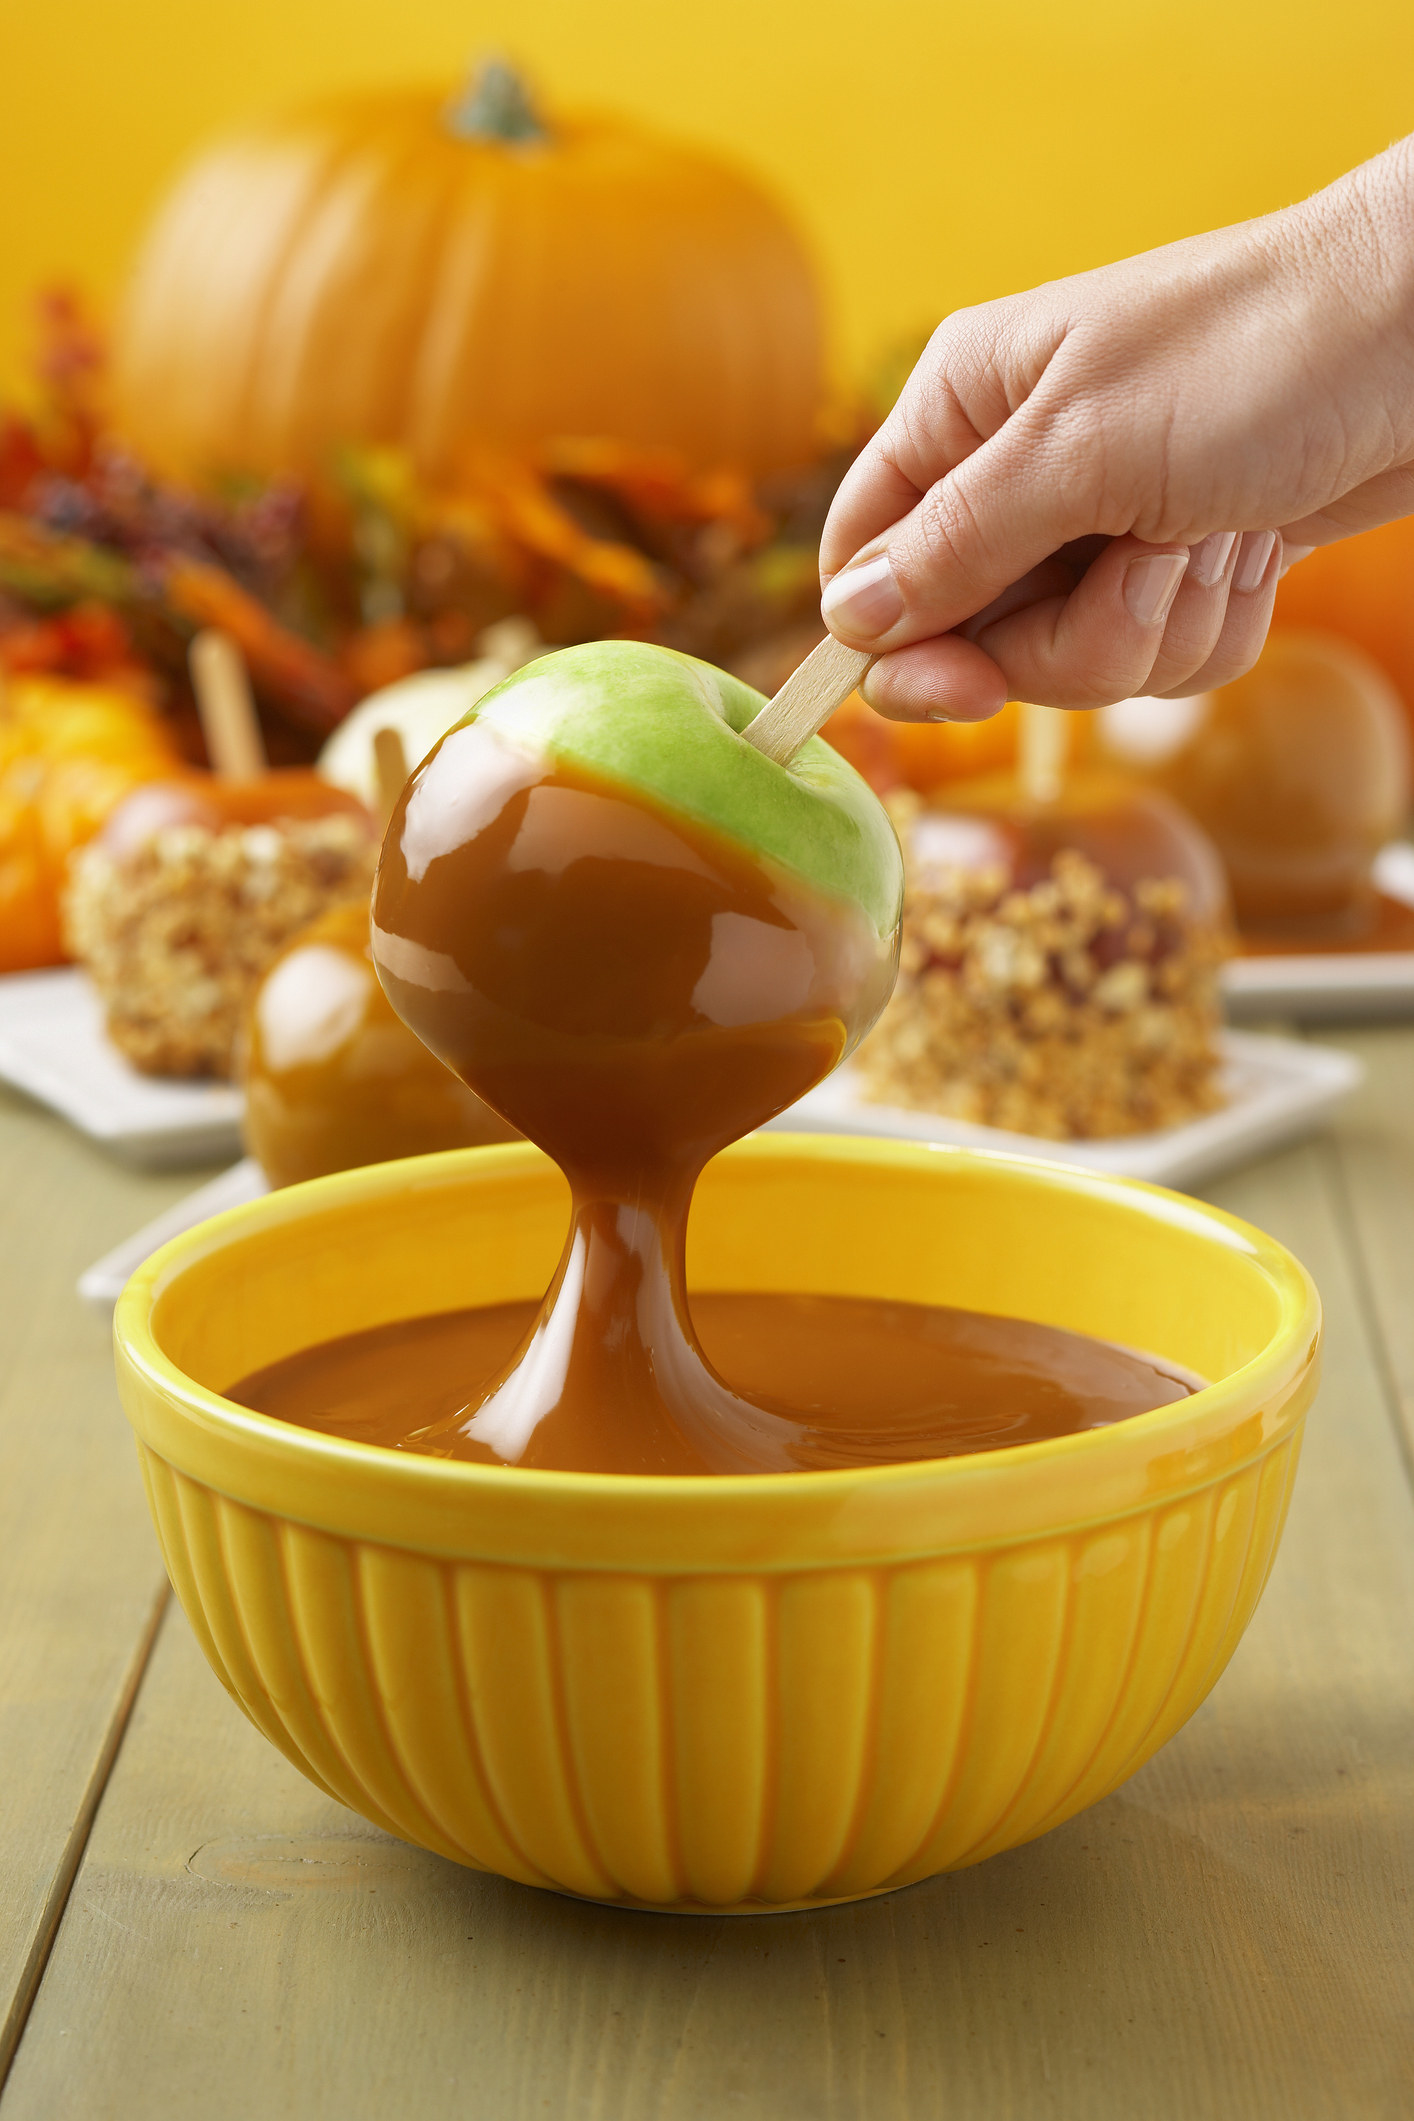 hand dunking an apple into a bowl of caramel